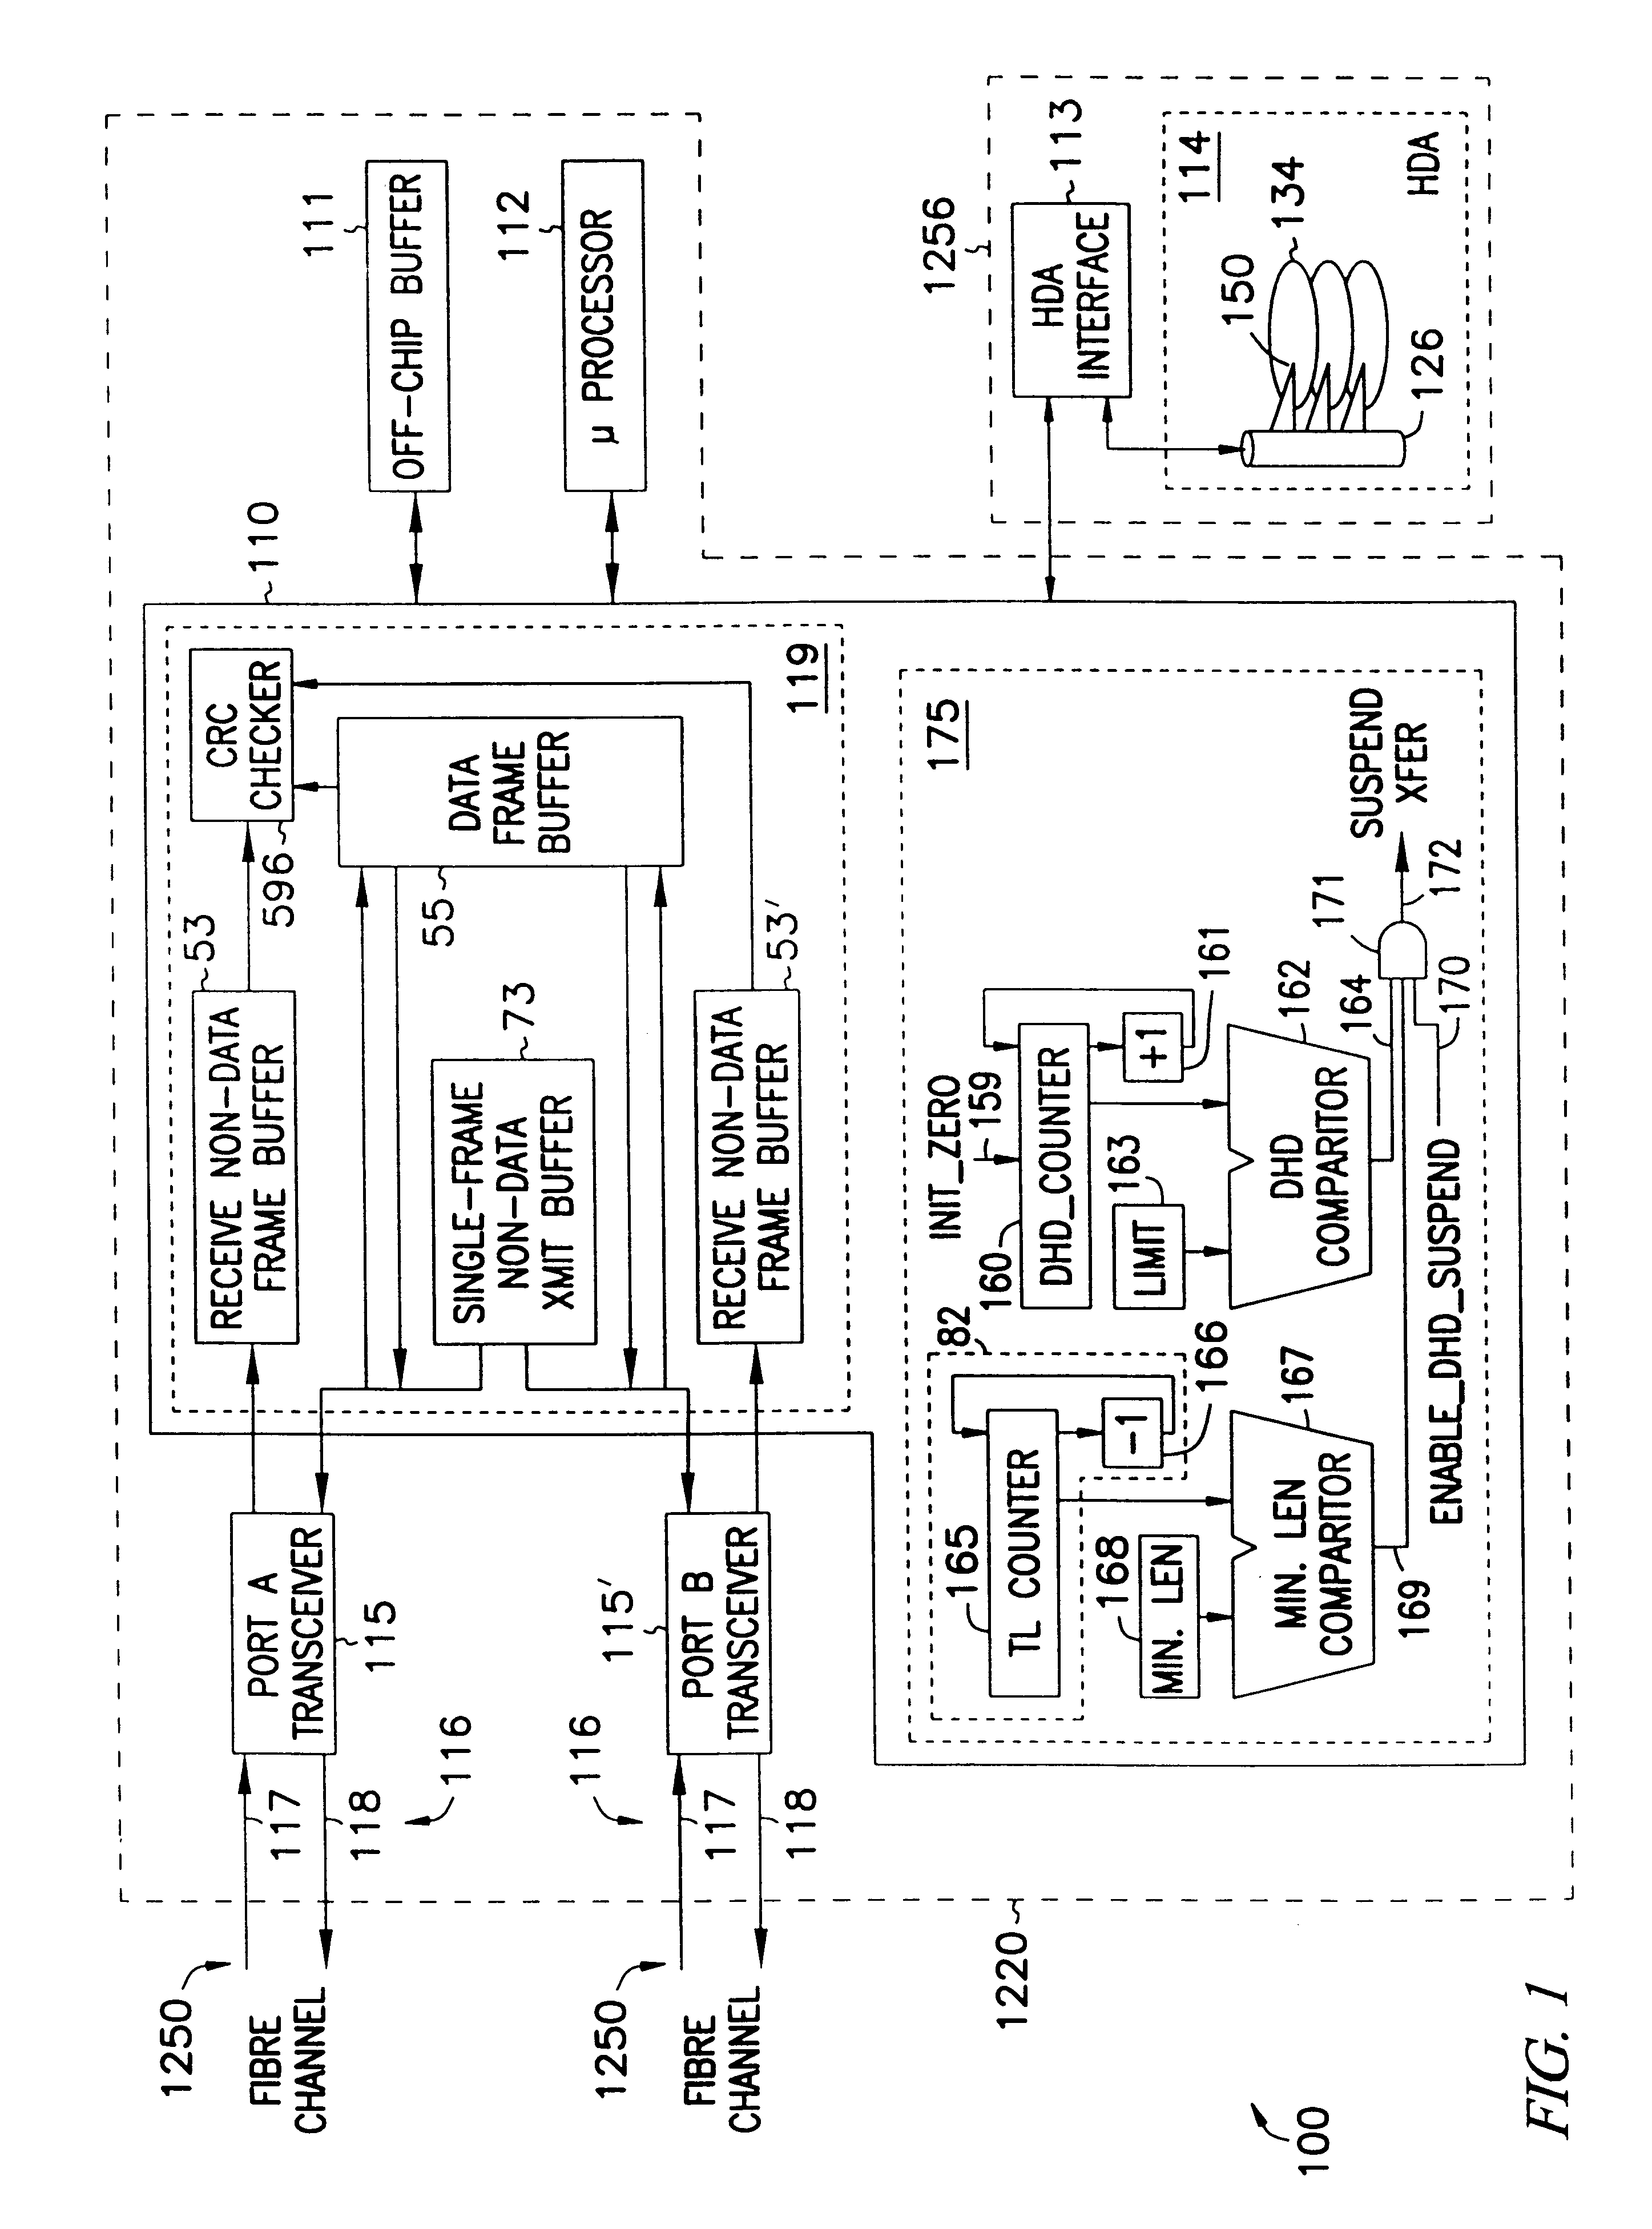 Method and apparatus for preserving loop fairness with dynamic half-duplex